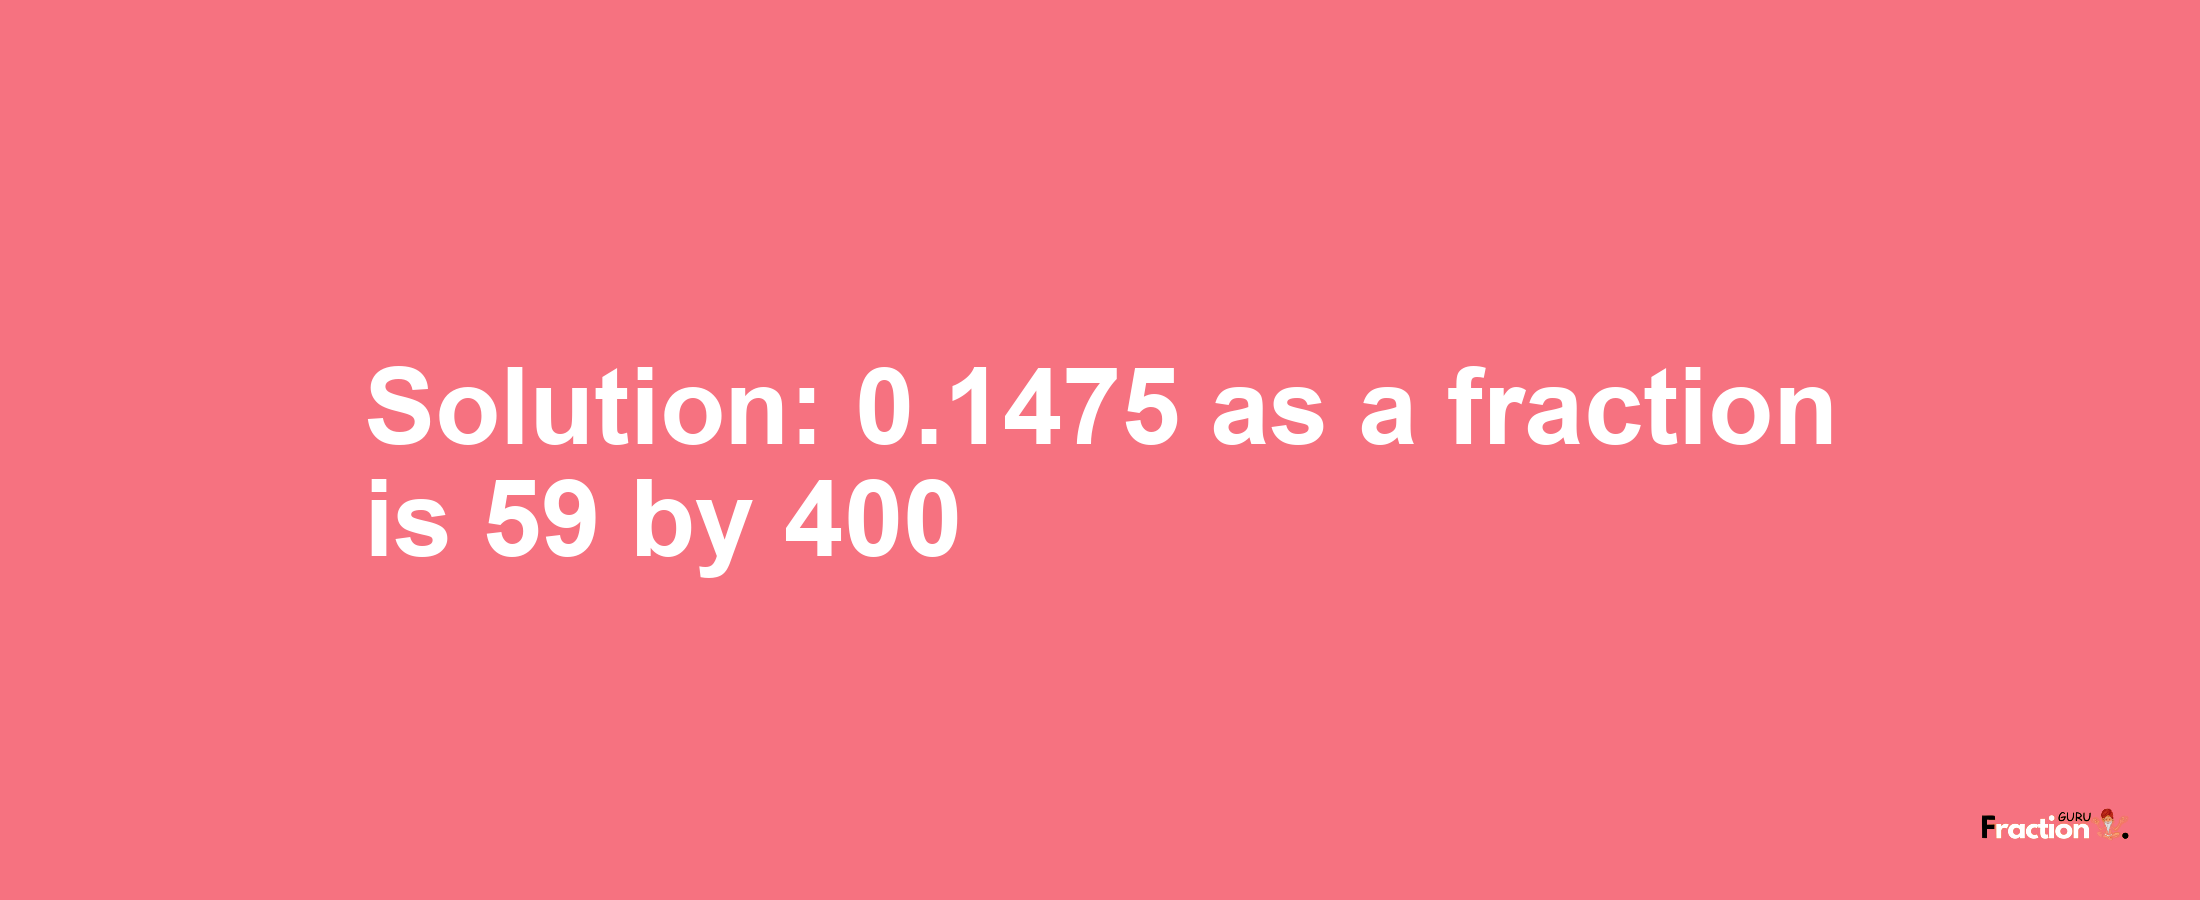 Solution:0.1475 as a fraction is 59/400